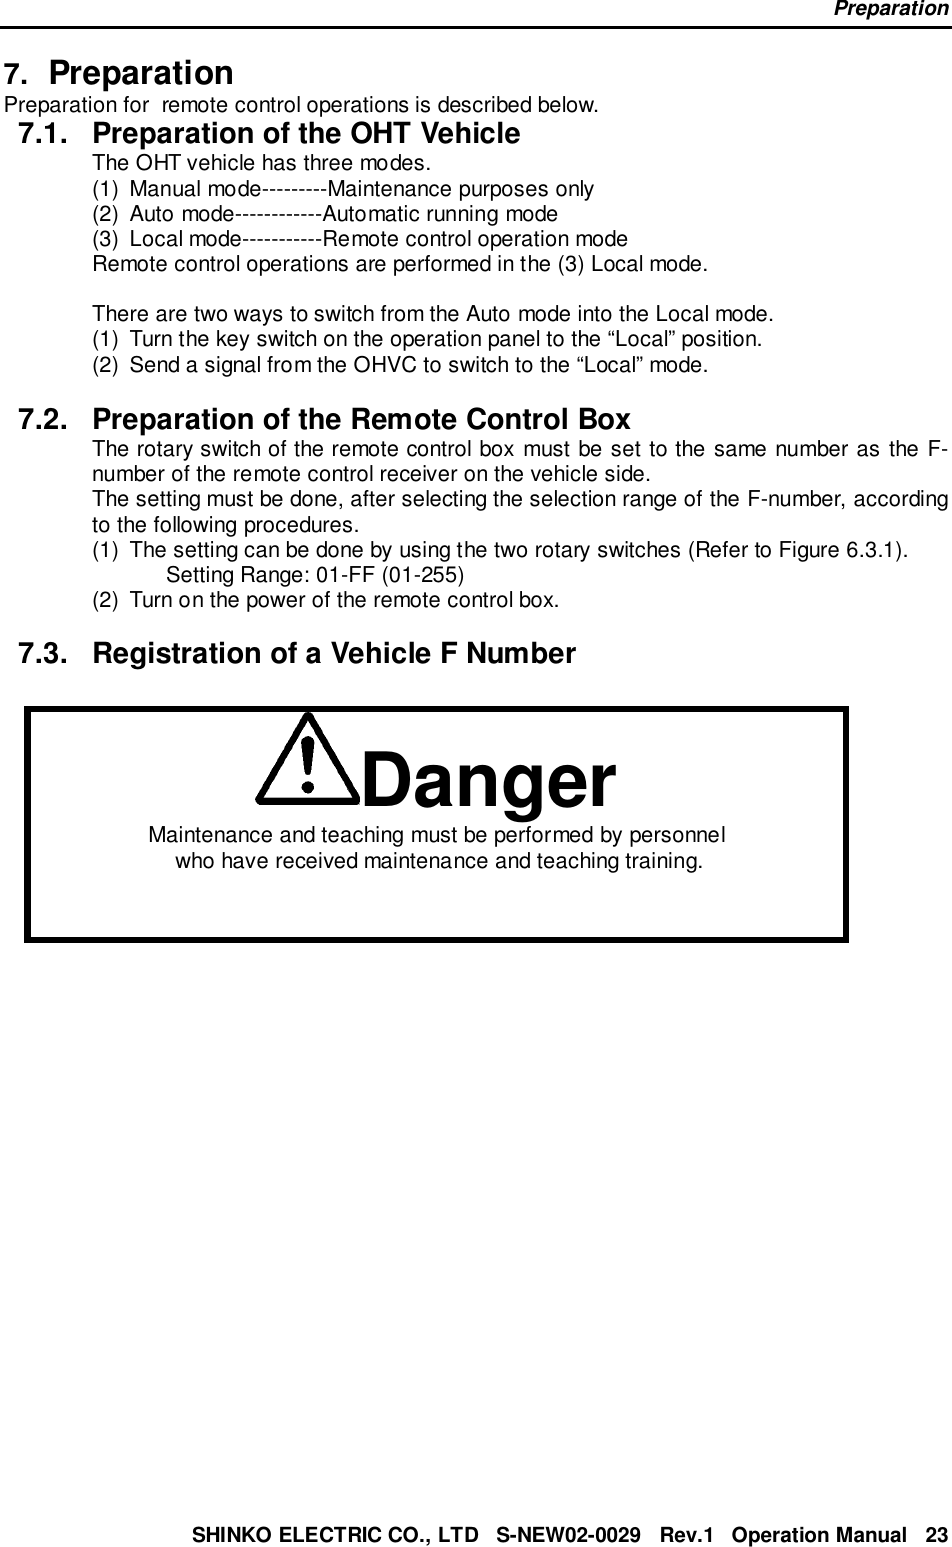 PreparationSHINKO ELECTRIC CO., LTD   S-NEW02-0029   Rev.1   Operation Manual   237.  PreparationPreparation for  remote control operations is described below.7.1.  Preparation of the OHT VehicleThe OHT vehicle has three modes.(1)  Manual mode---------Maintenance purposes only(2)  Auto mode------------Automatic running mode(3)  Local mode-----------Remote control operation modeRemote control operations are performed in the (3) Local mode.There are two ways to switch from the Auto mode into the Local mode.(1)  Turn the key switch on the operation panel to the “Local” position.(2)  Send a signal from the OHVC to switch to the “Local” mode.7.2.  Preparation of the Remote Control BoxThe rotary switch of the remote control box must be set to the same number as the F-number of the remote control receiver on the vehicle side.The setting must be done, after selecting the selection range of the F-number, accordingto the following procedures.(1)  The setting can be done by using the two rotary switches (Refer to Figure 6.3.1).Setting Range: 01-FF (01-255)(2)  Turn on the power of the remote control box.7.3.  Registration of a Vehicle F NumberDangerMaintenance and teaching must be performed by personnel who have received maintenance and teaching training.